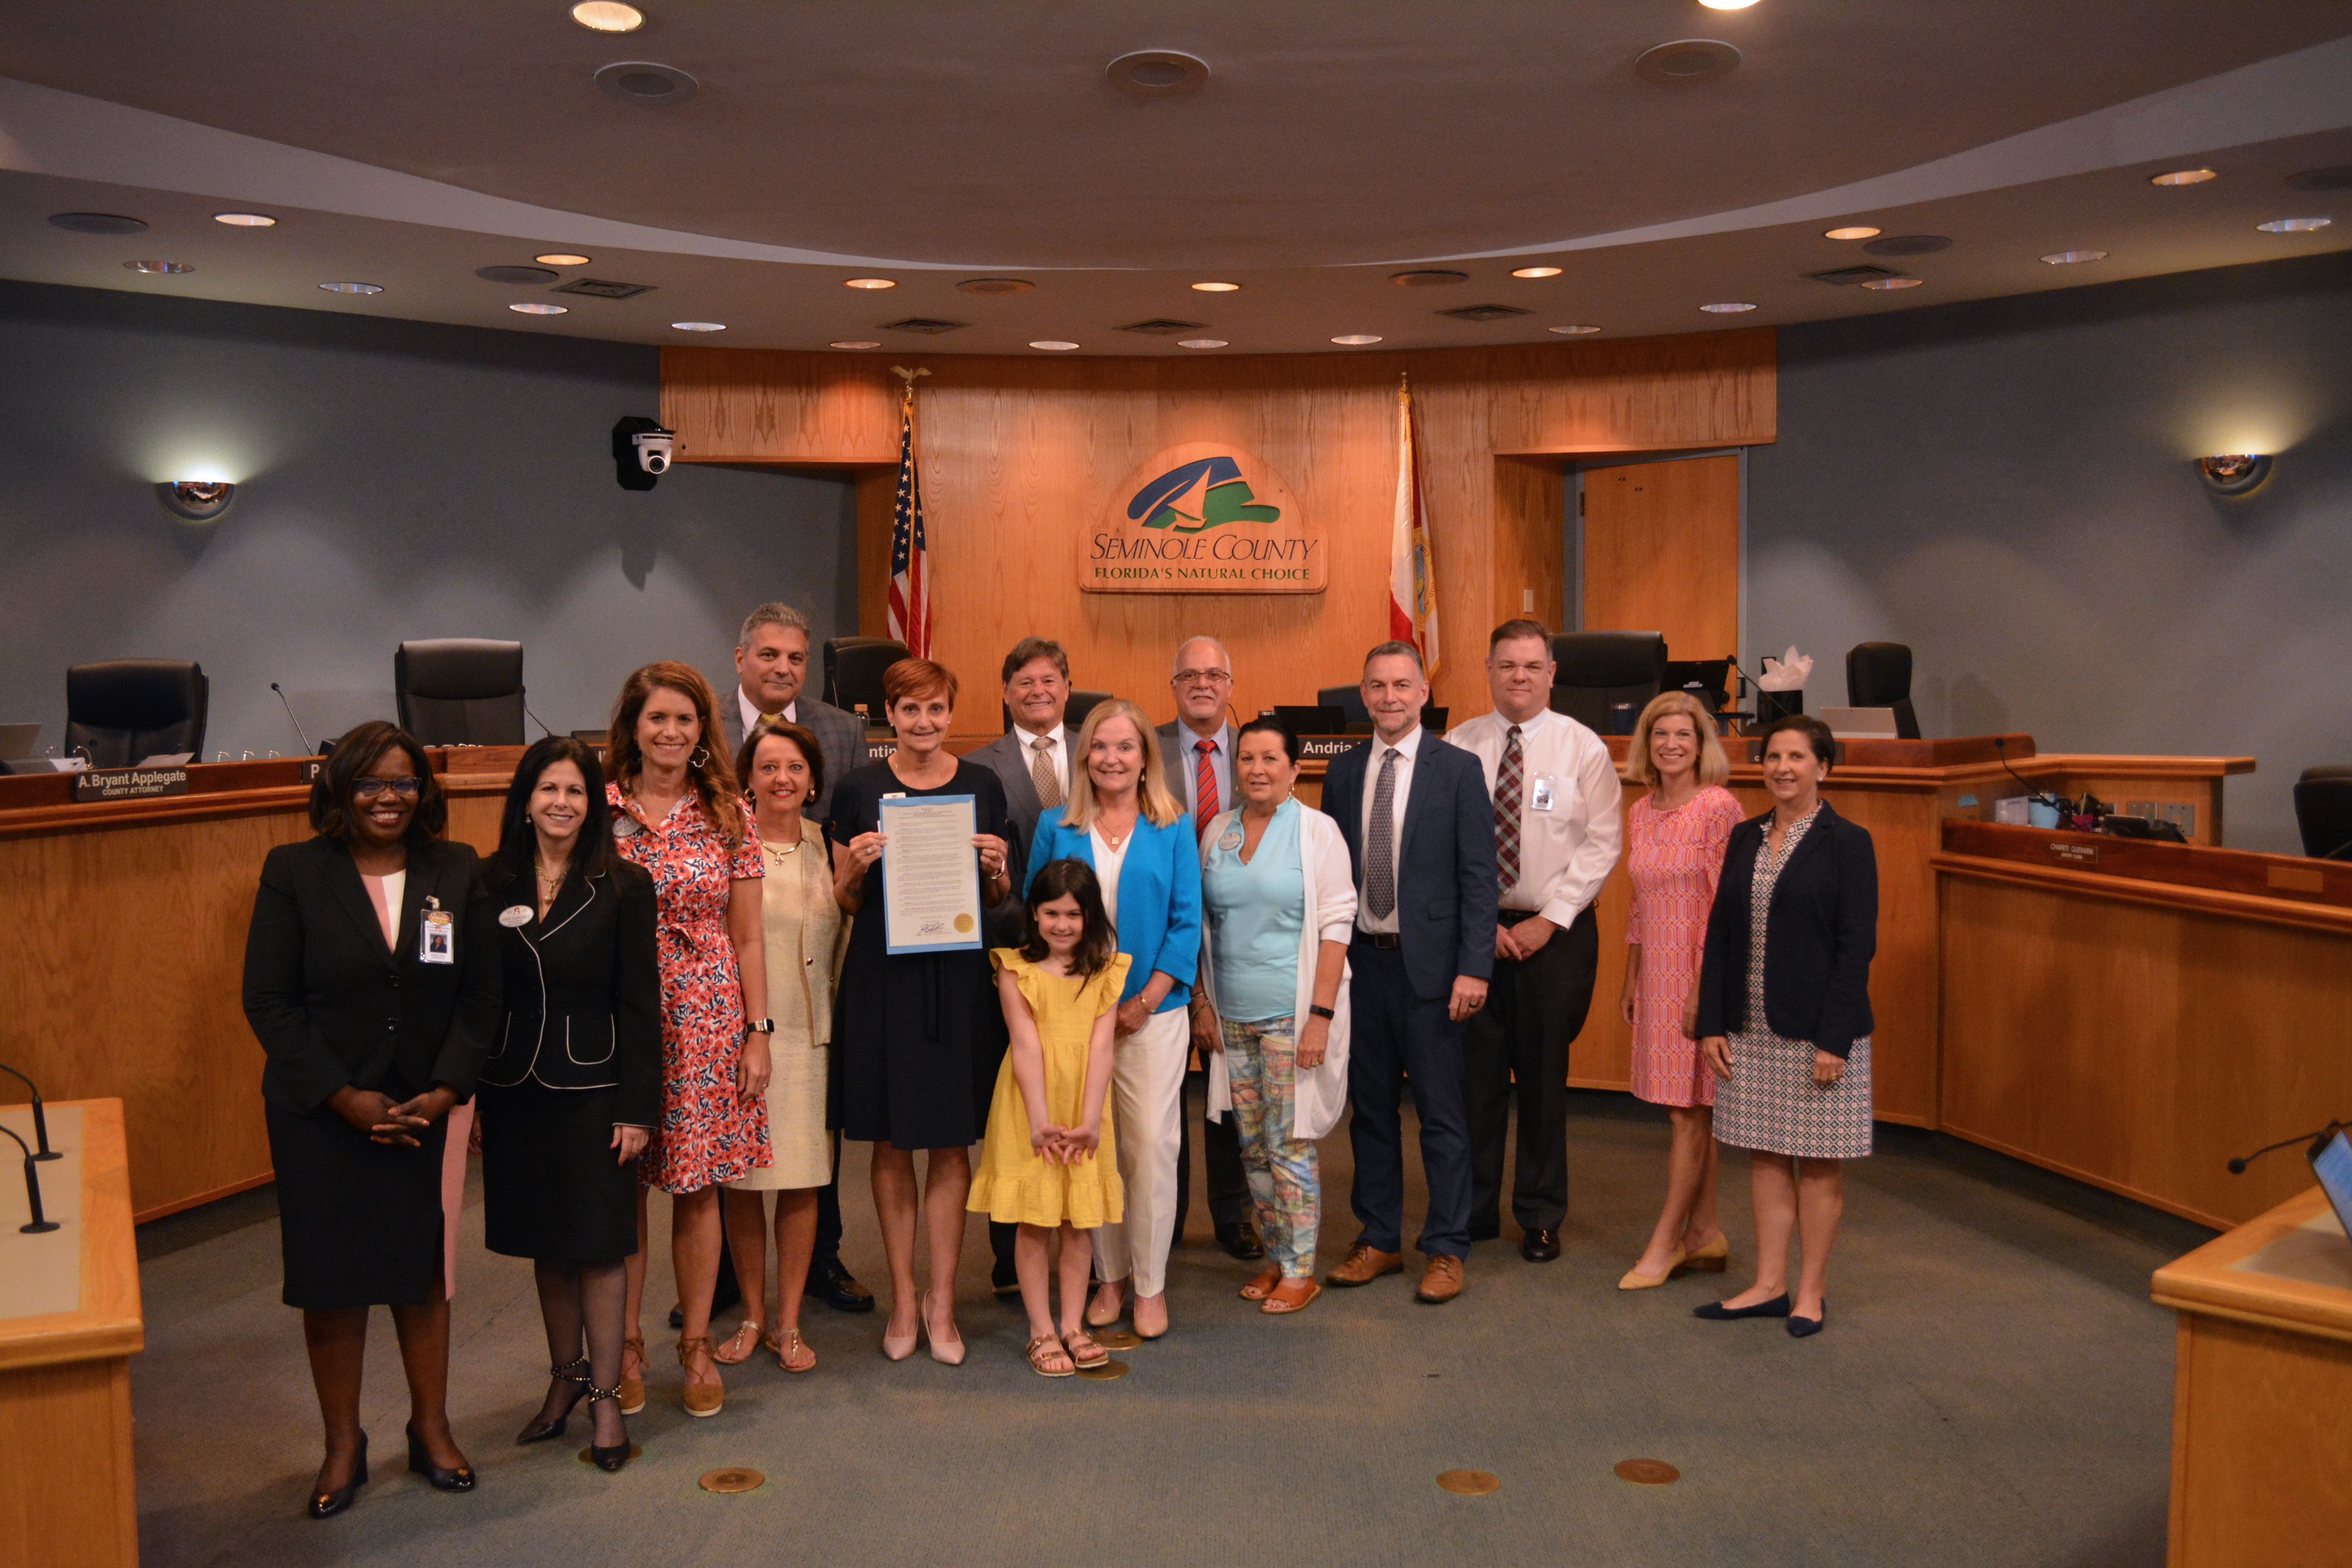 Resolution - Recognizing Julie Gabrovic as the Seminole County Public Schools Teacher of The Year. 